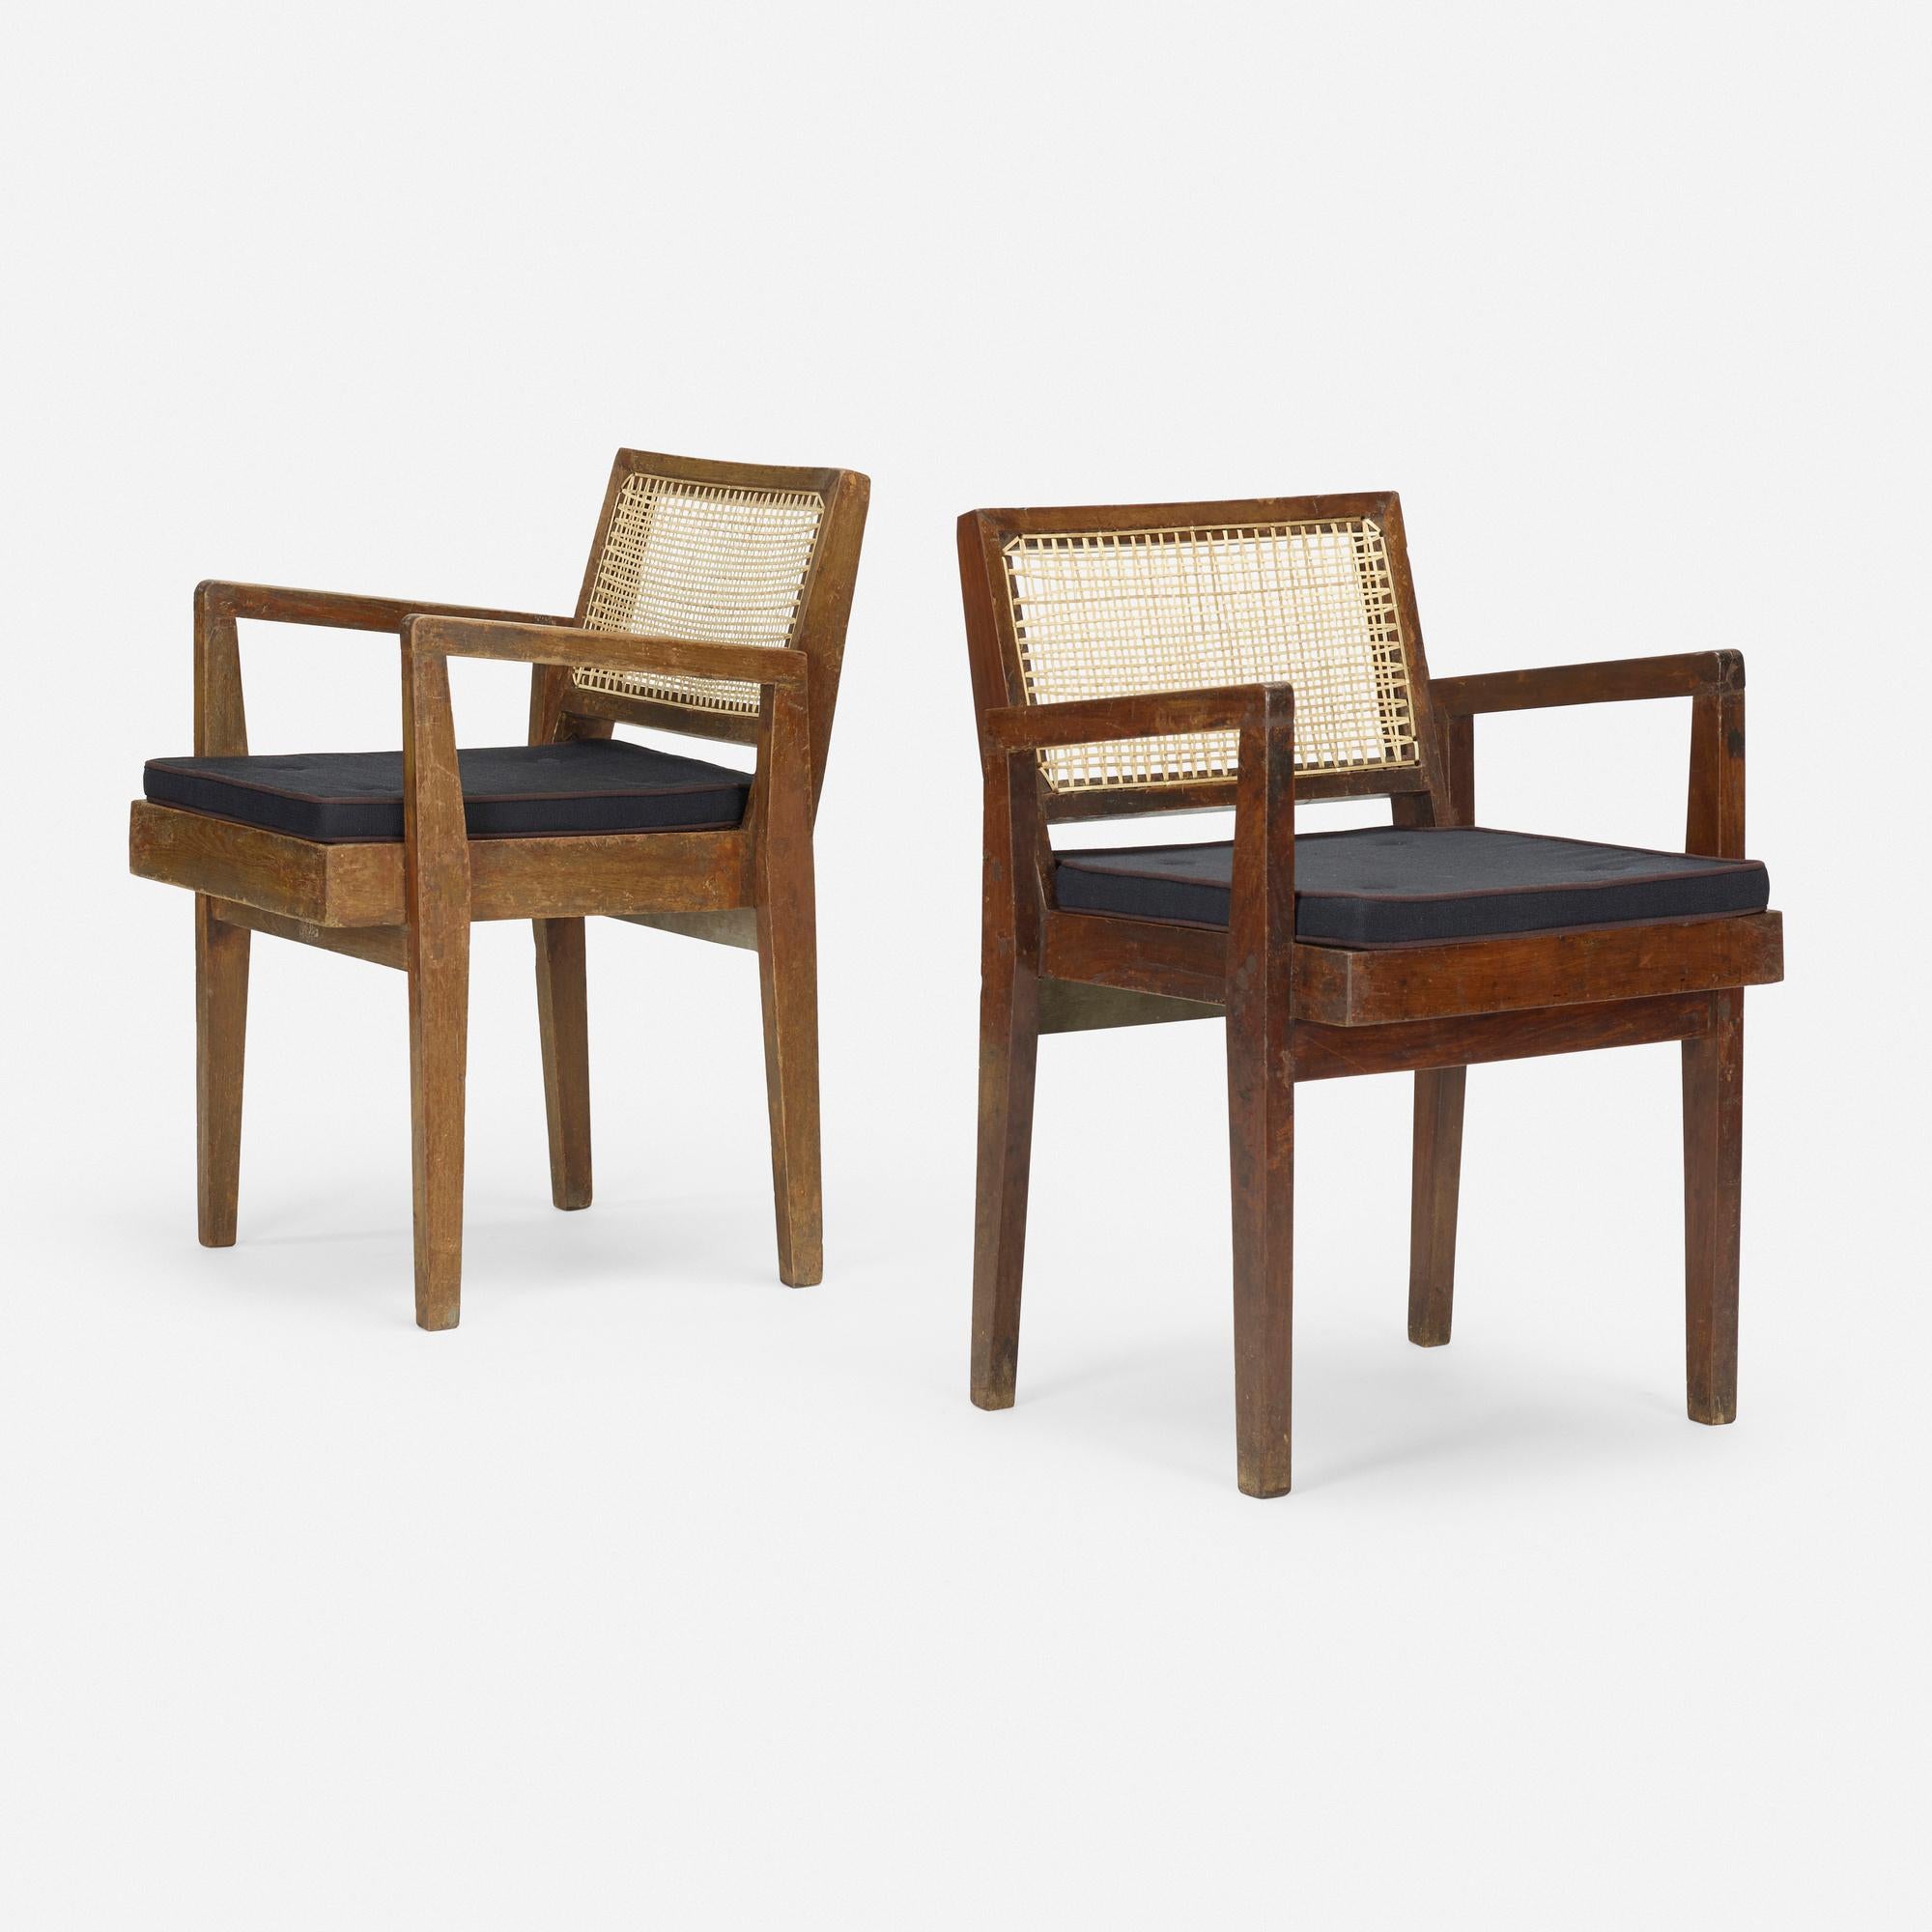 A pair of authentic arm chairs from Chandigarh deisgned by Pierre Jeanneret. Date of manufacture is between 1955-1960. These chairs are made of solid Burma teak with caned seats and backs.  The rear upper rail of each chair base has been stenciled.